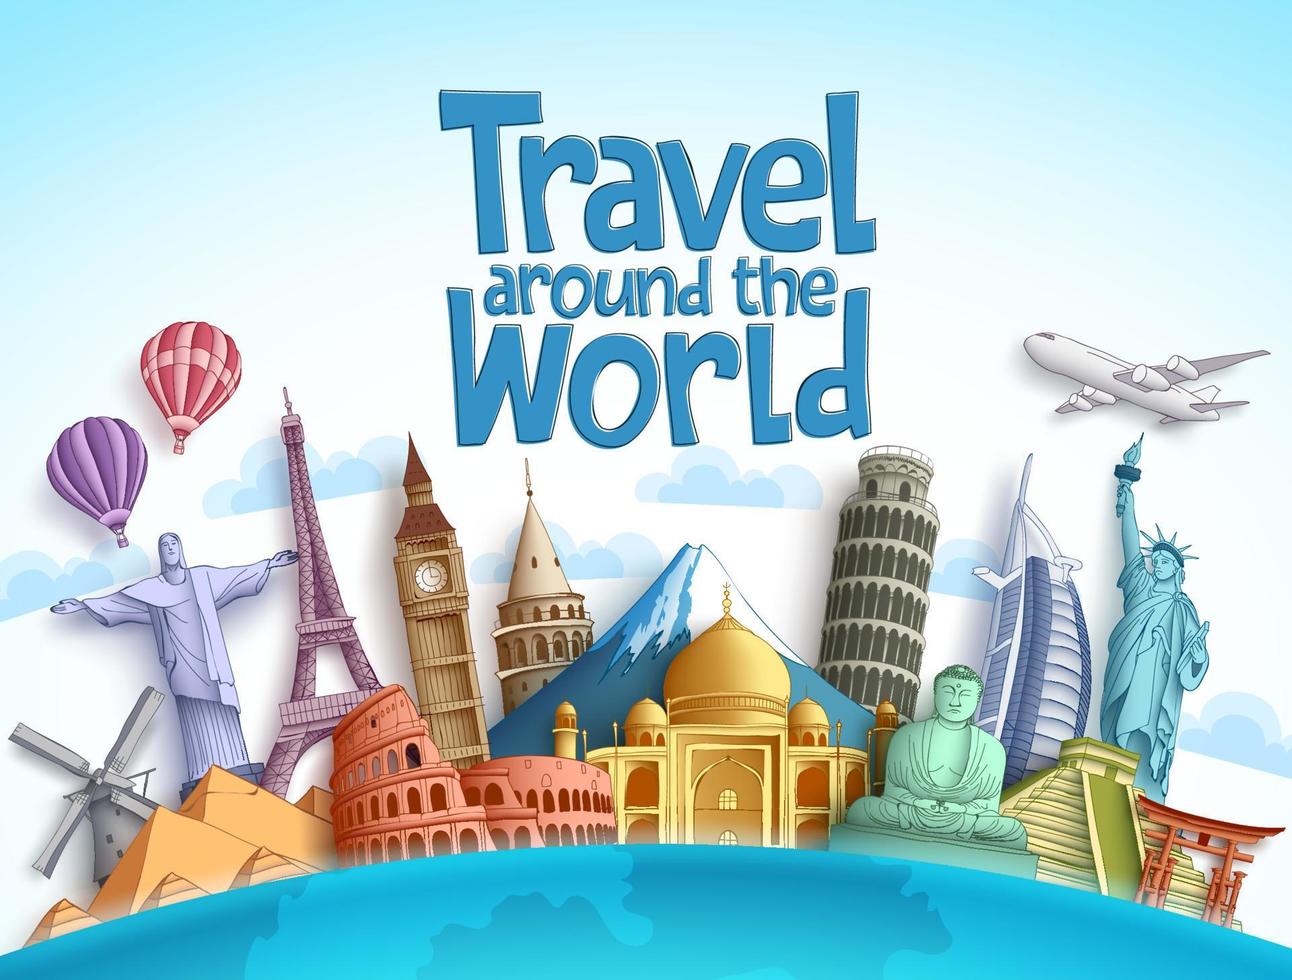 Travel around the world vector design with famous landmarks and tourist destination of different countries and places in blue background. Vector illustration.